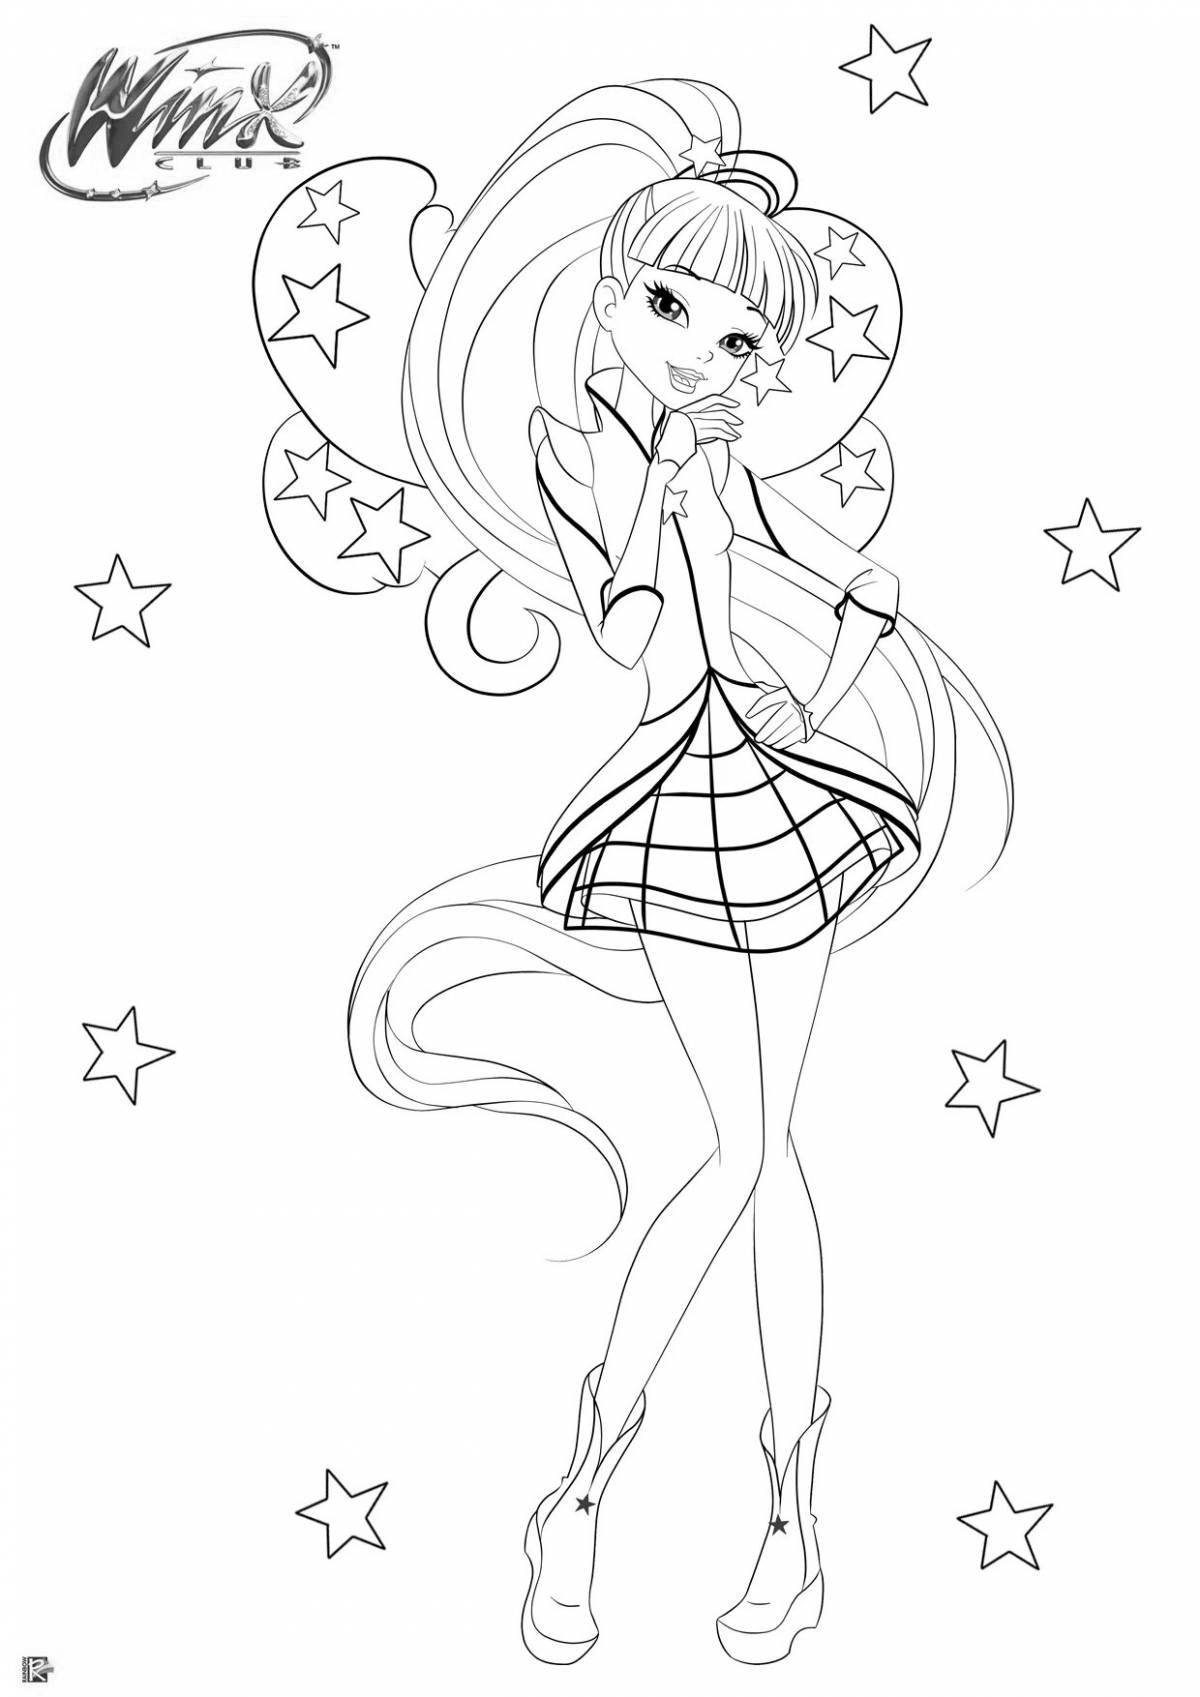 Radiant winx comic coloring page